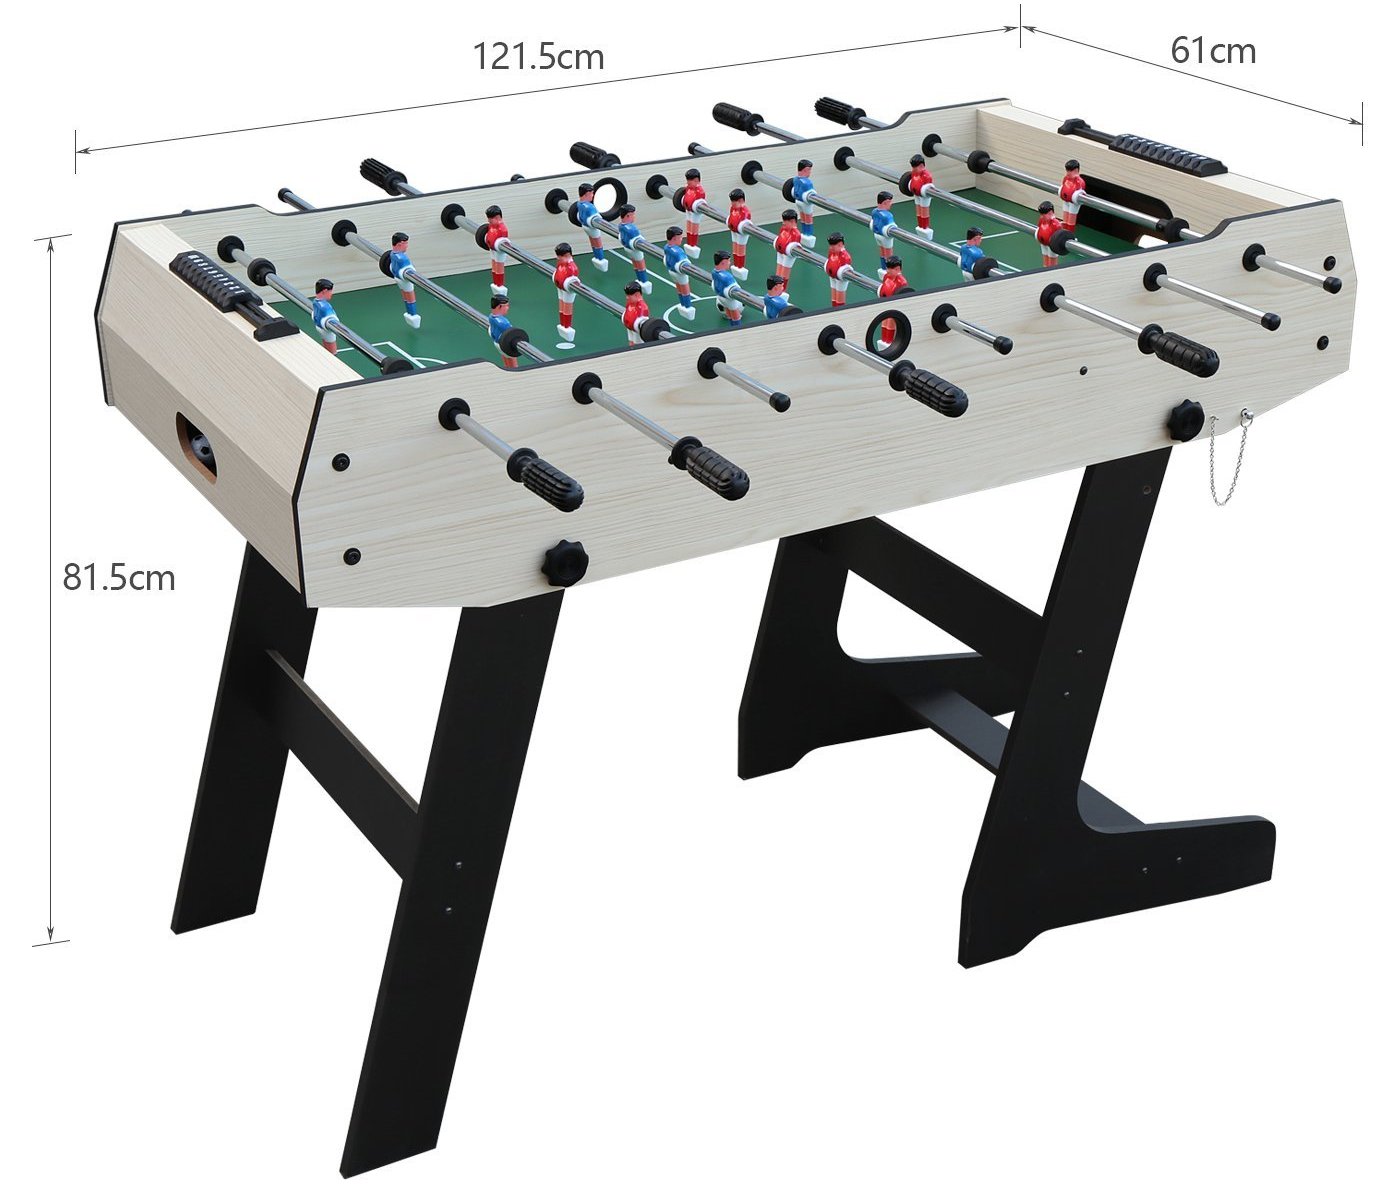 hlc 4 foot foldable soccer table image